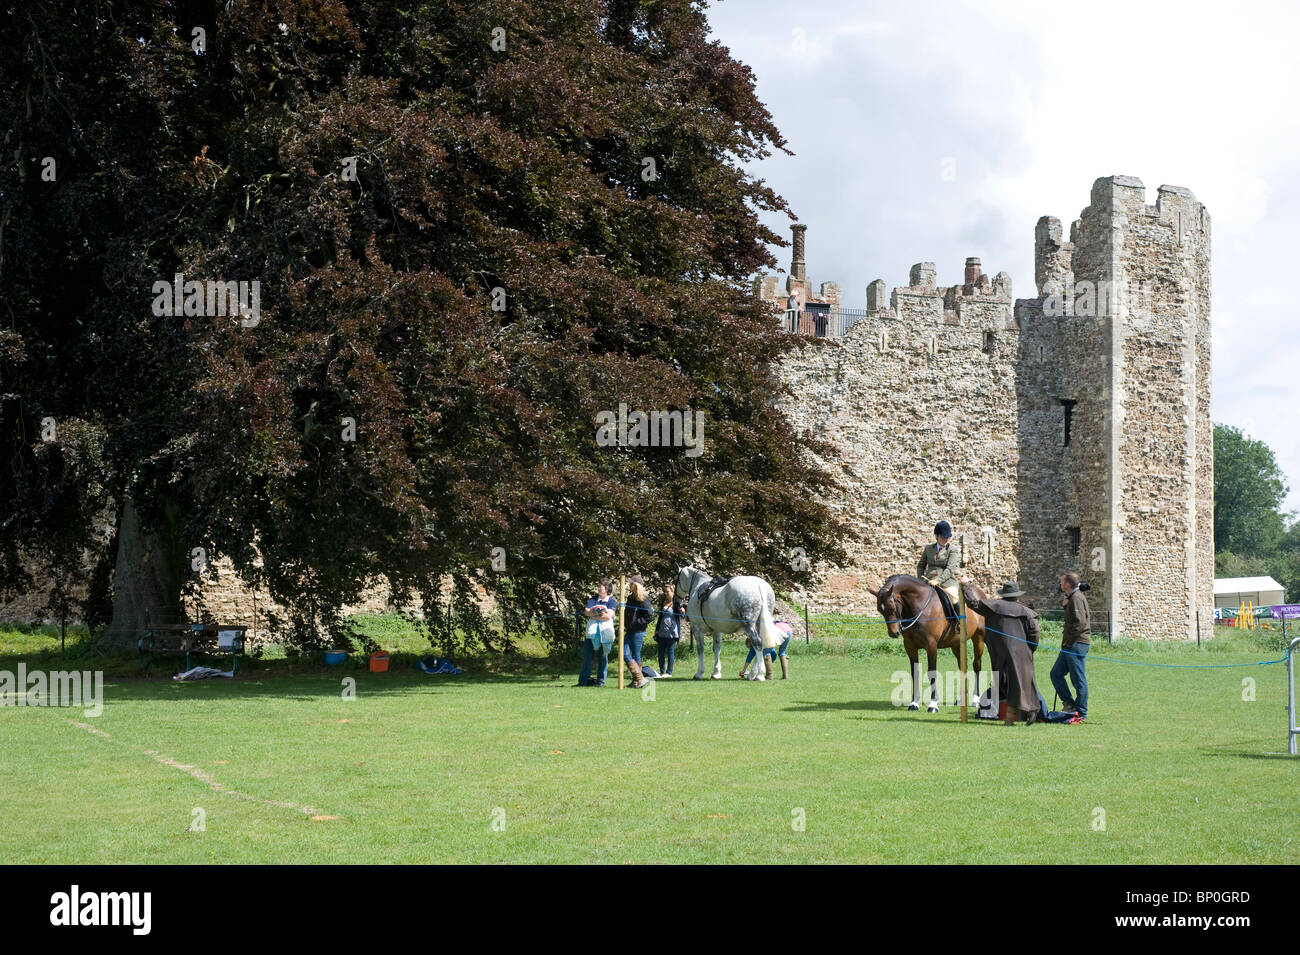 Horses and riders taking part in Framlingham Horse Show with Framlingham Castle in the background Stock Photo